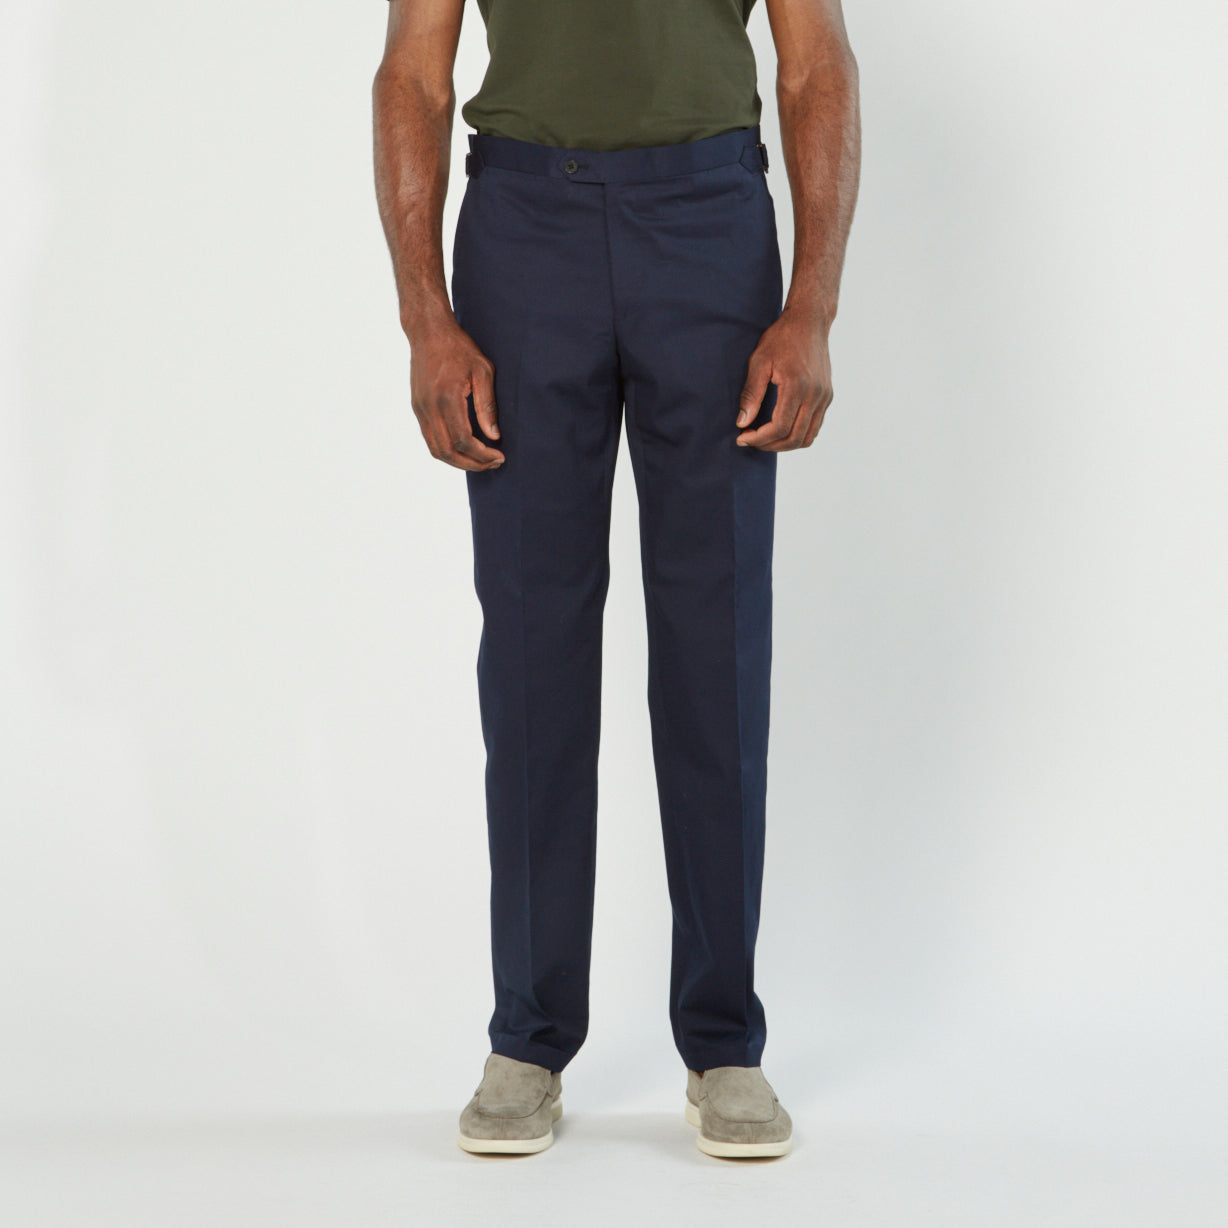 Navy Cotton Dress Trouser with Side Adjusters